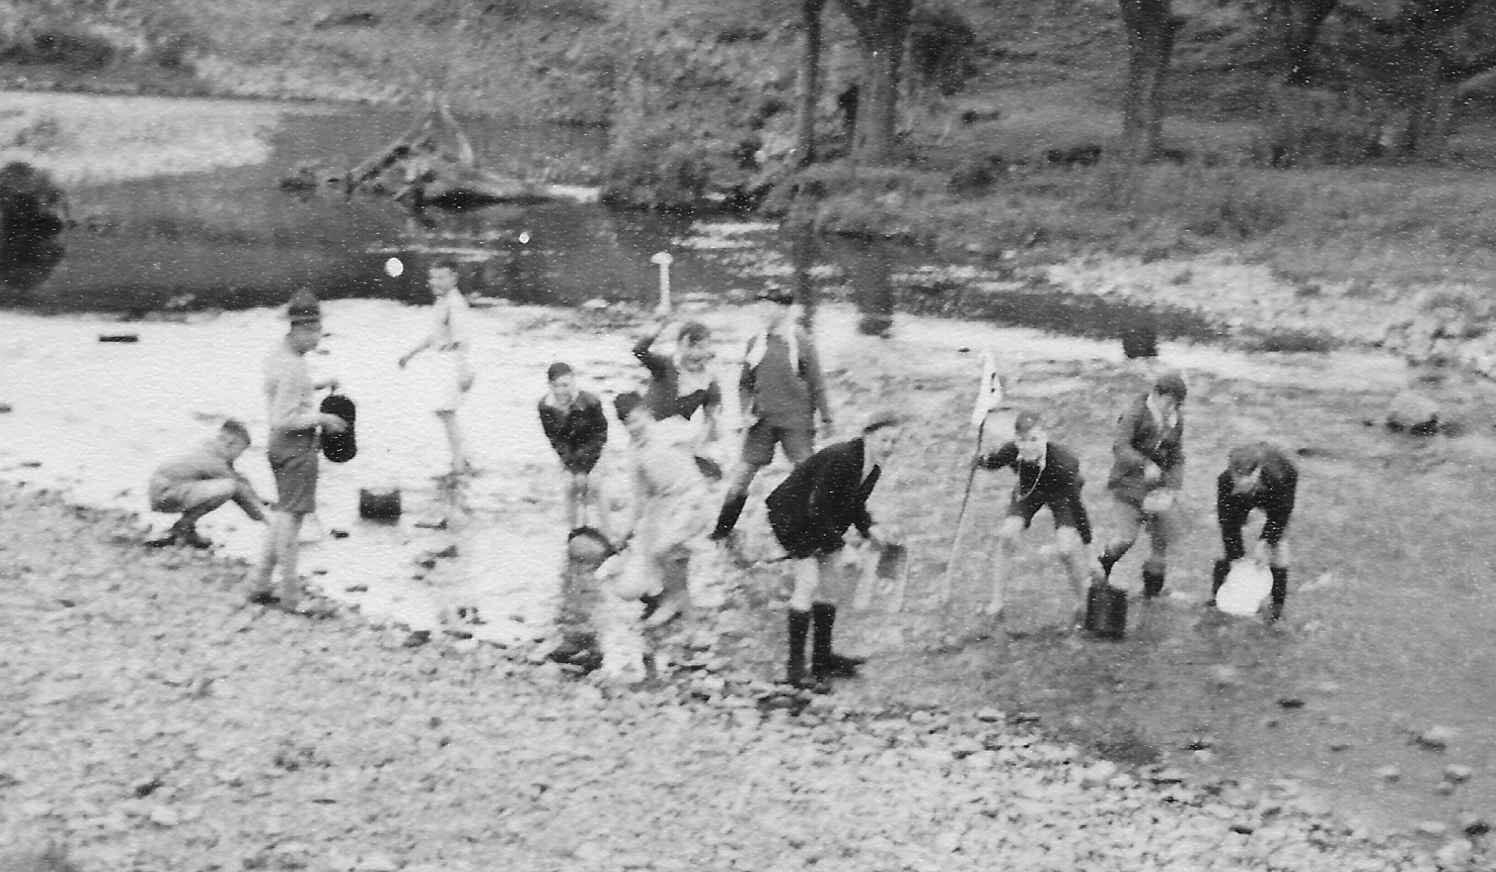 Scouts camp, August 1954 Radnorshire